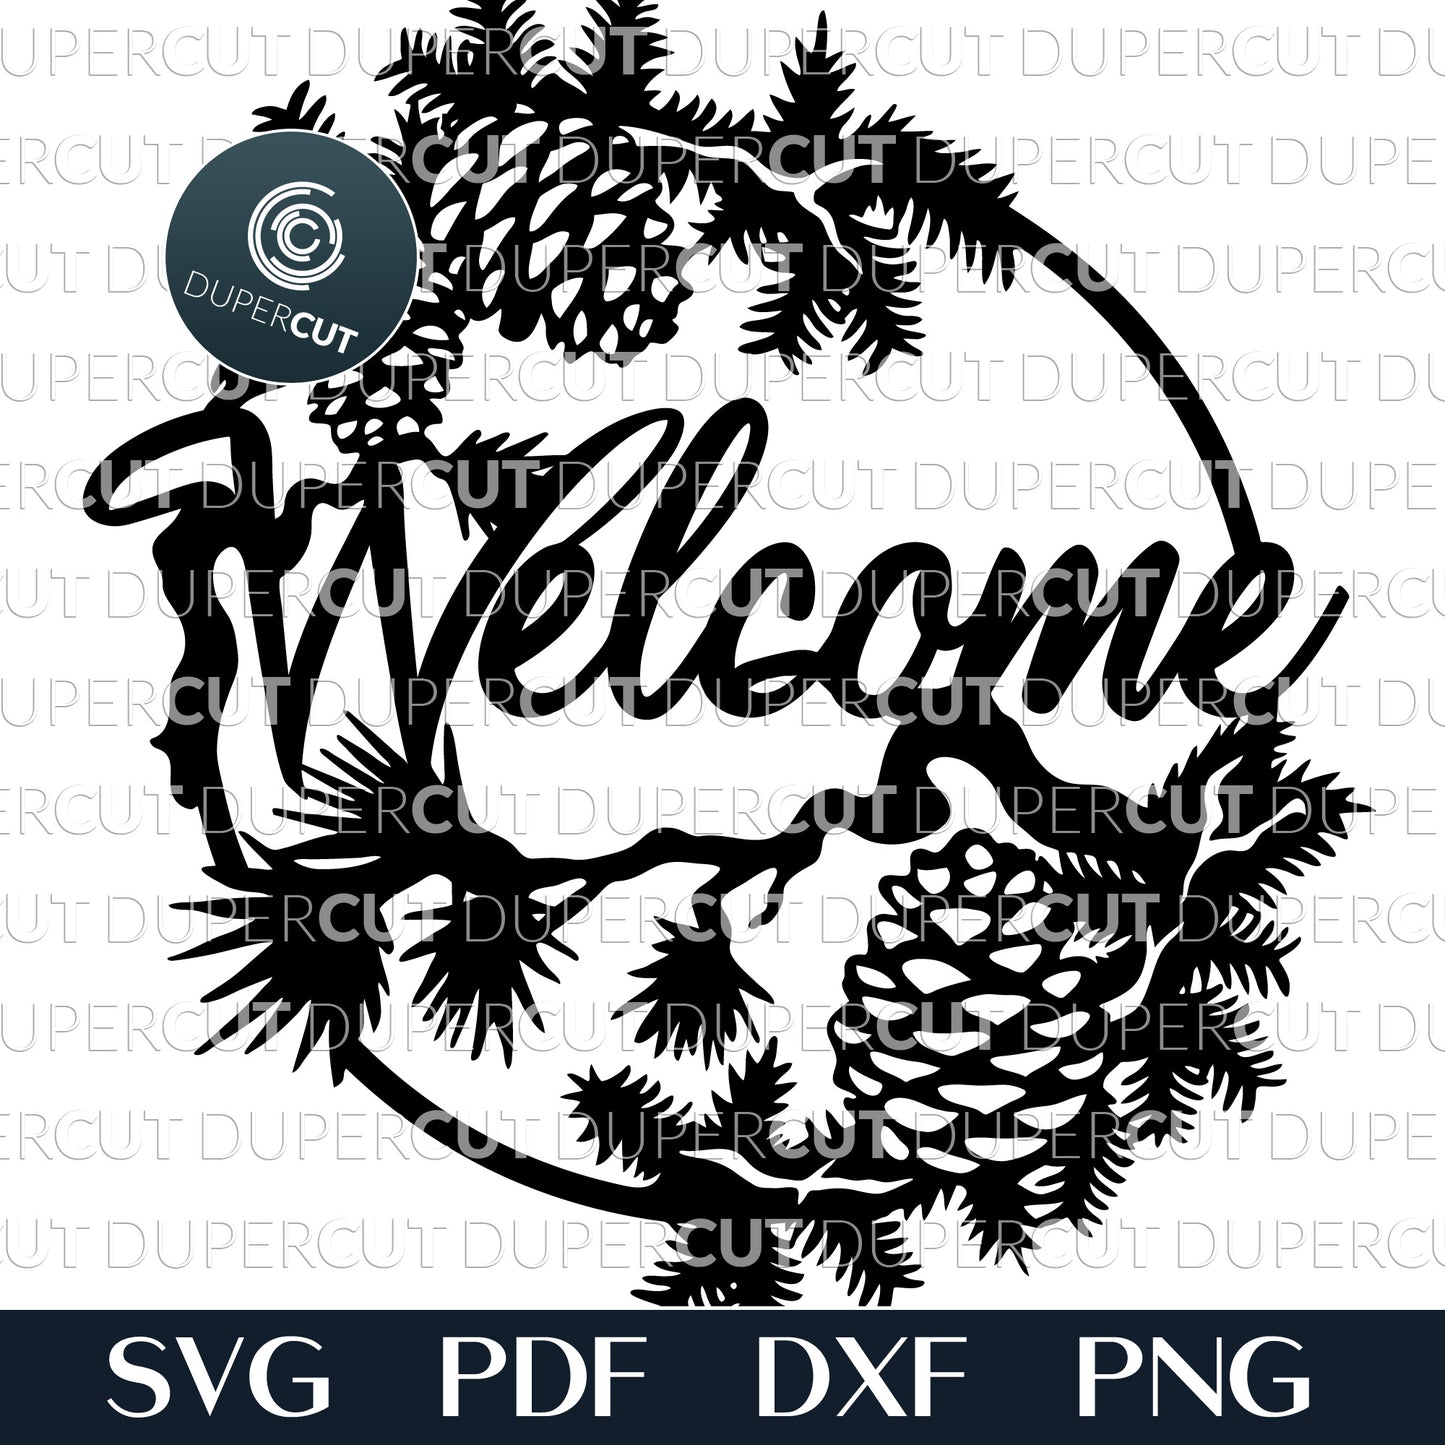 Welcome signs bundle - pinecone welcome - dual layer laser cutting files - SVG PDF DXF vector designs for Glowforge, Cricut, Silhouette Cameo, CNC plasma machines by DuperCut